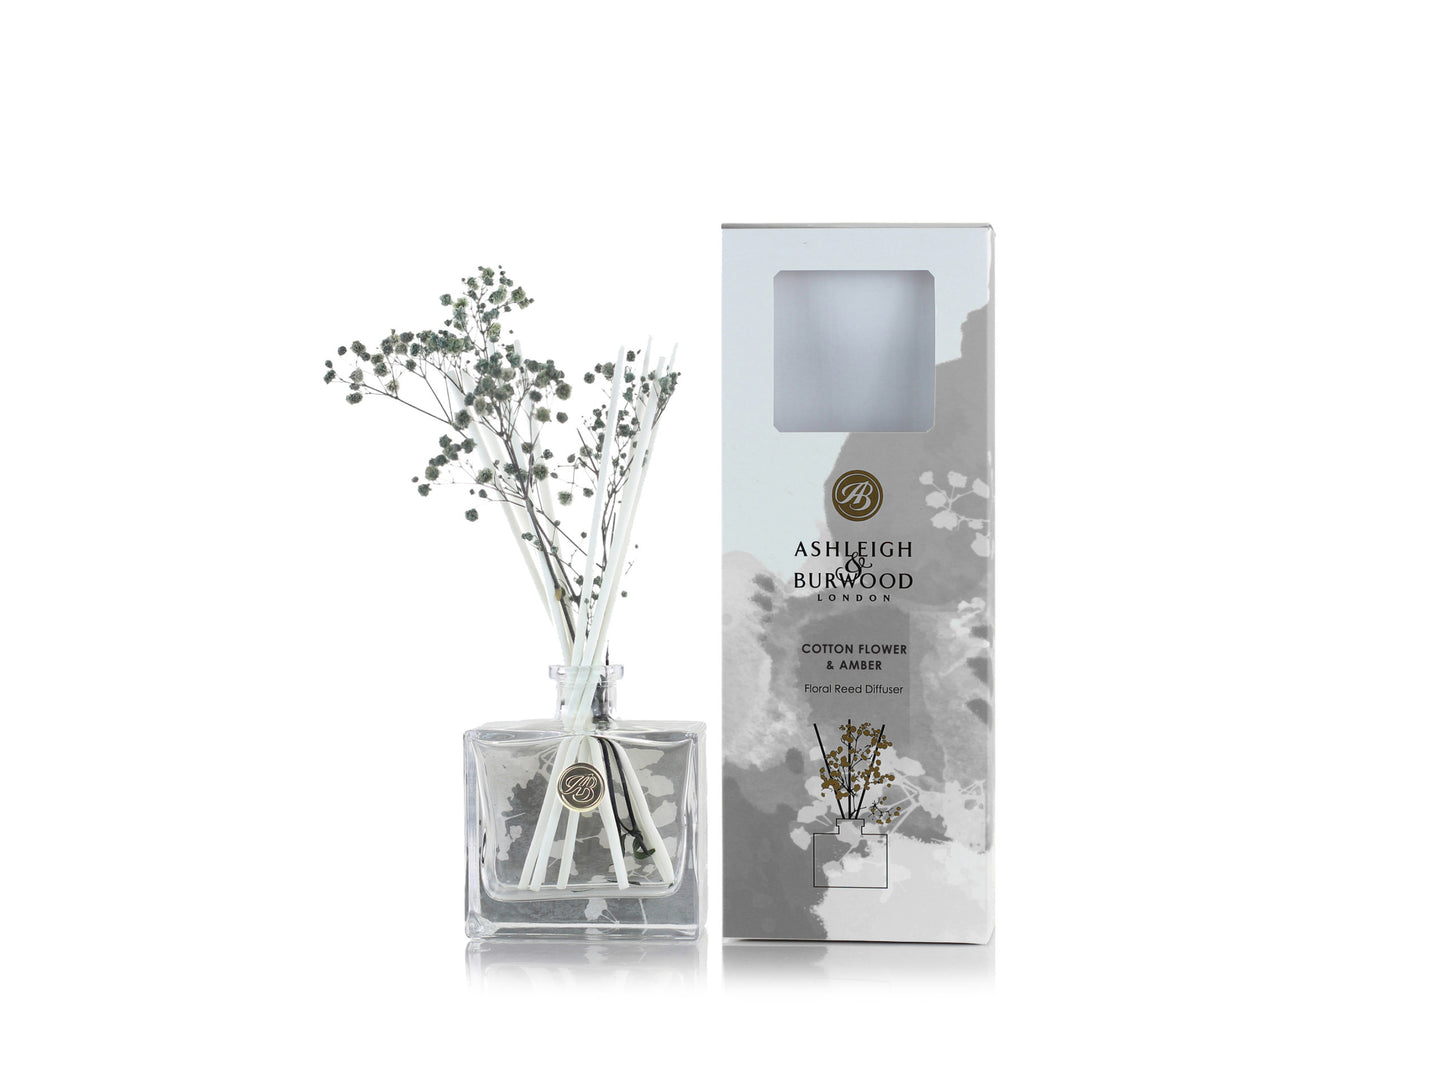 A beautiful glass diffuser bottle with white reeds and dried gypsophila flowers with a grey and white gift box and a cotton flower and amber scent